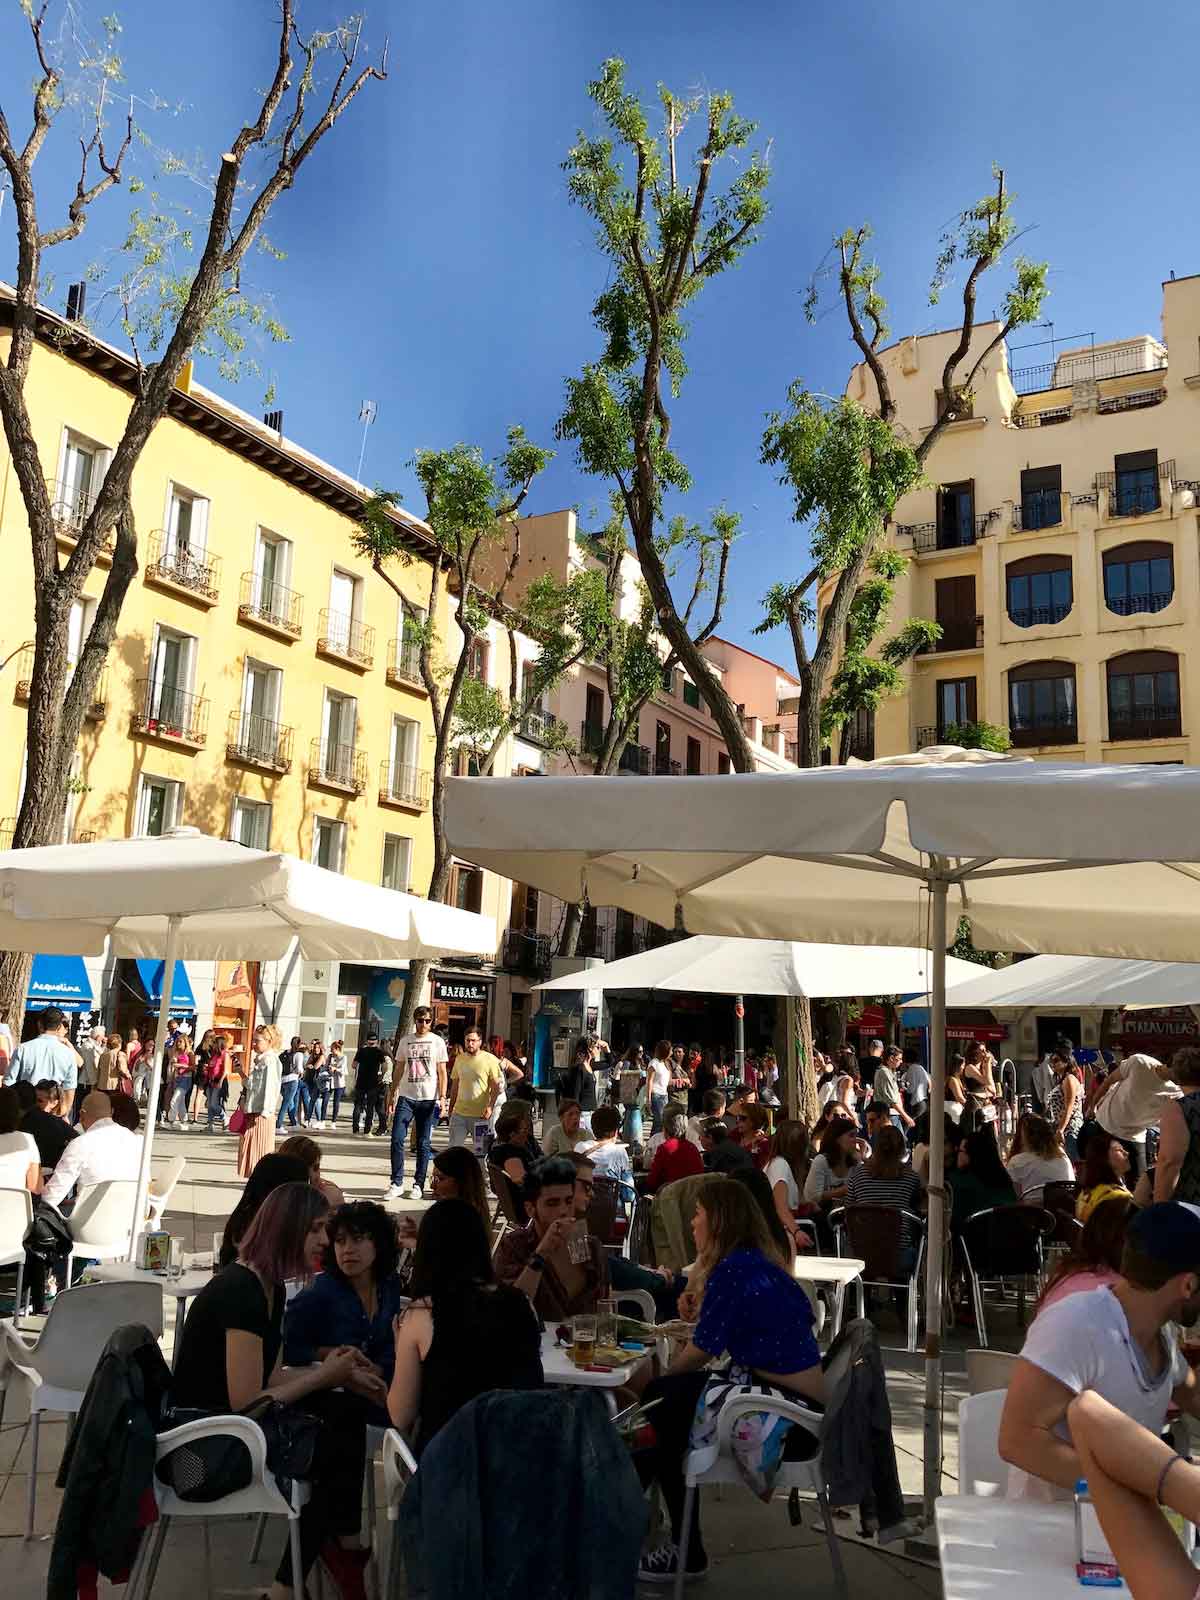 Tables full of people eating and drinking in an urban plaza on a sunny day